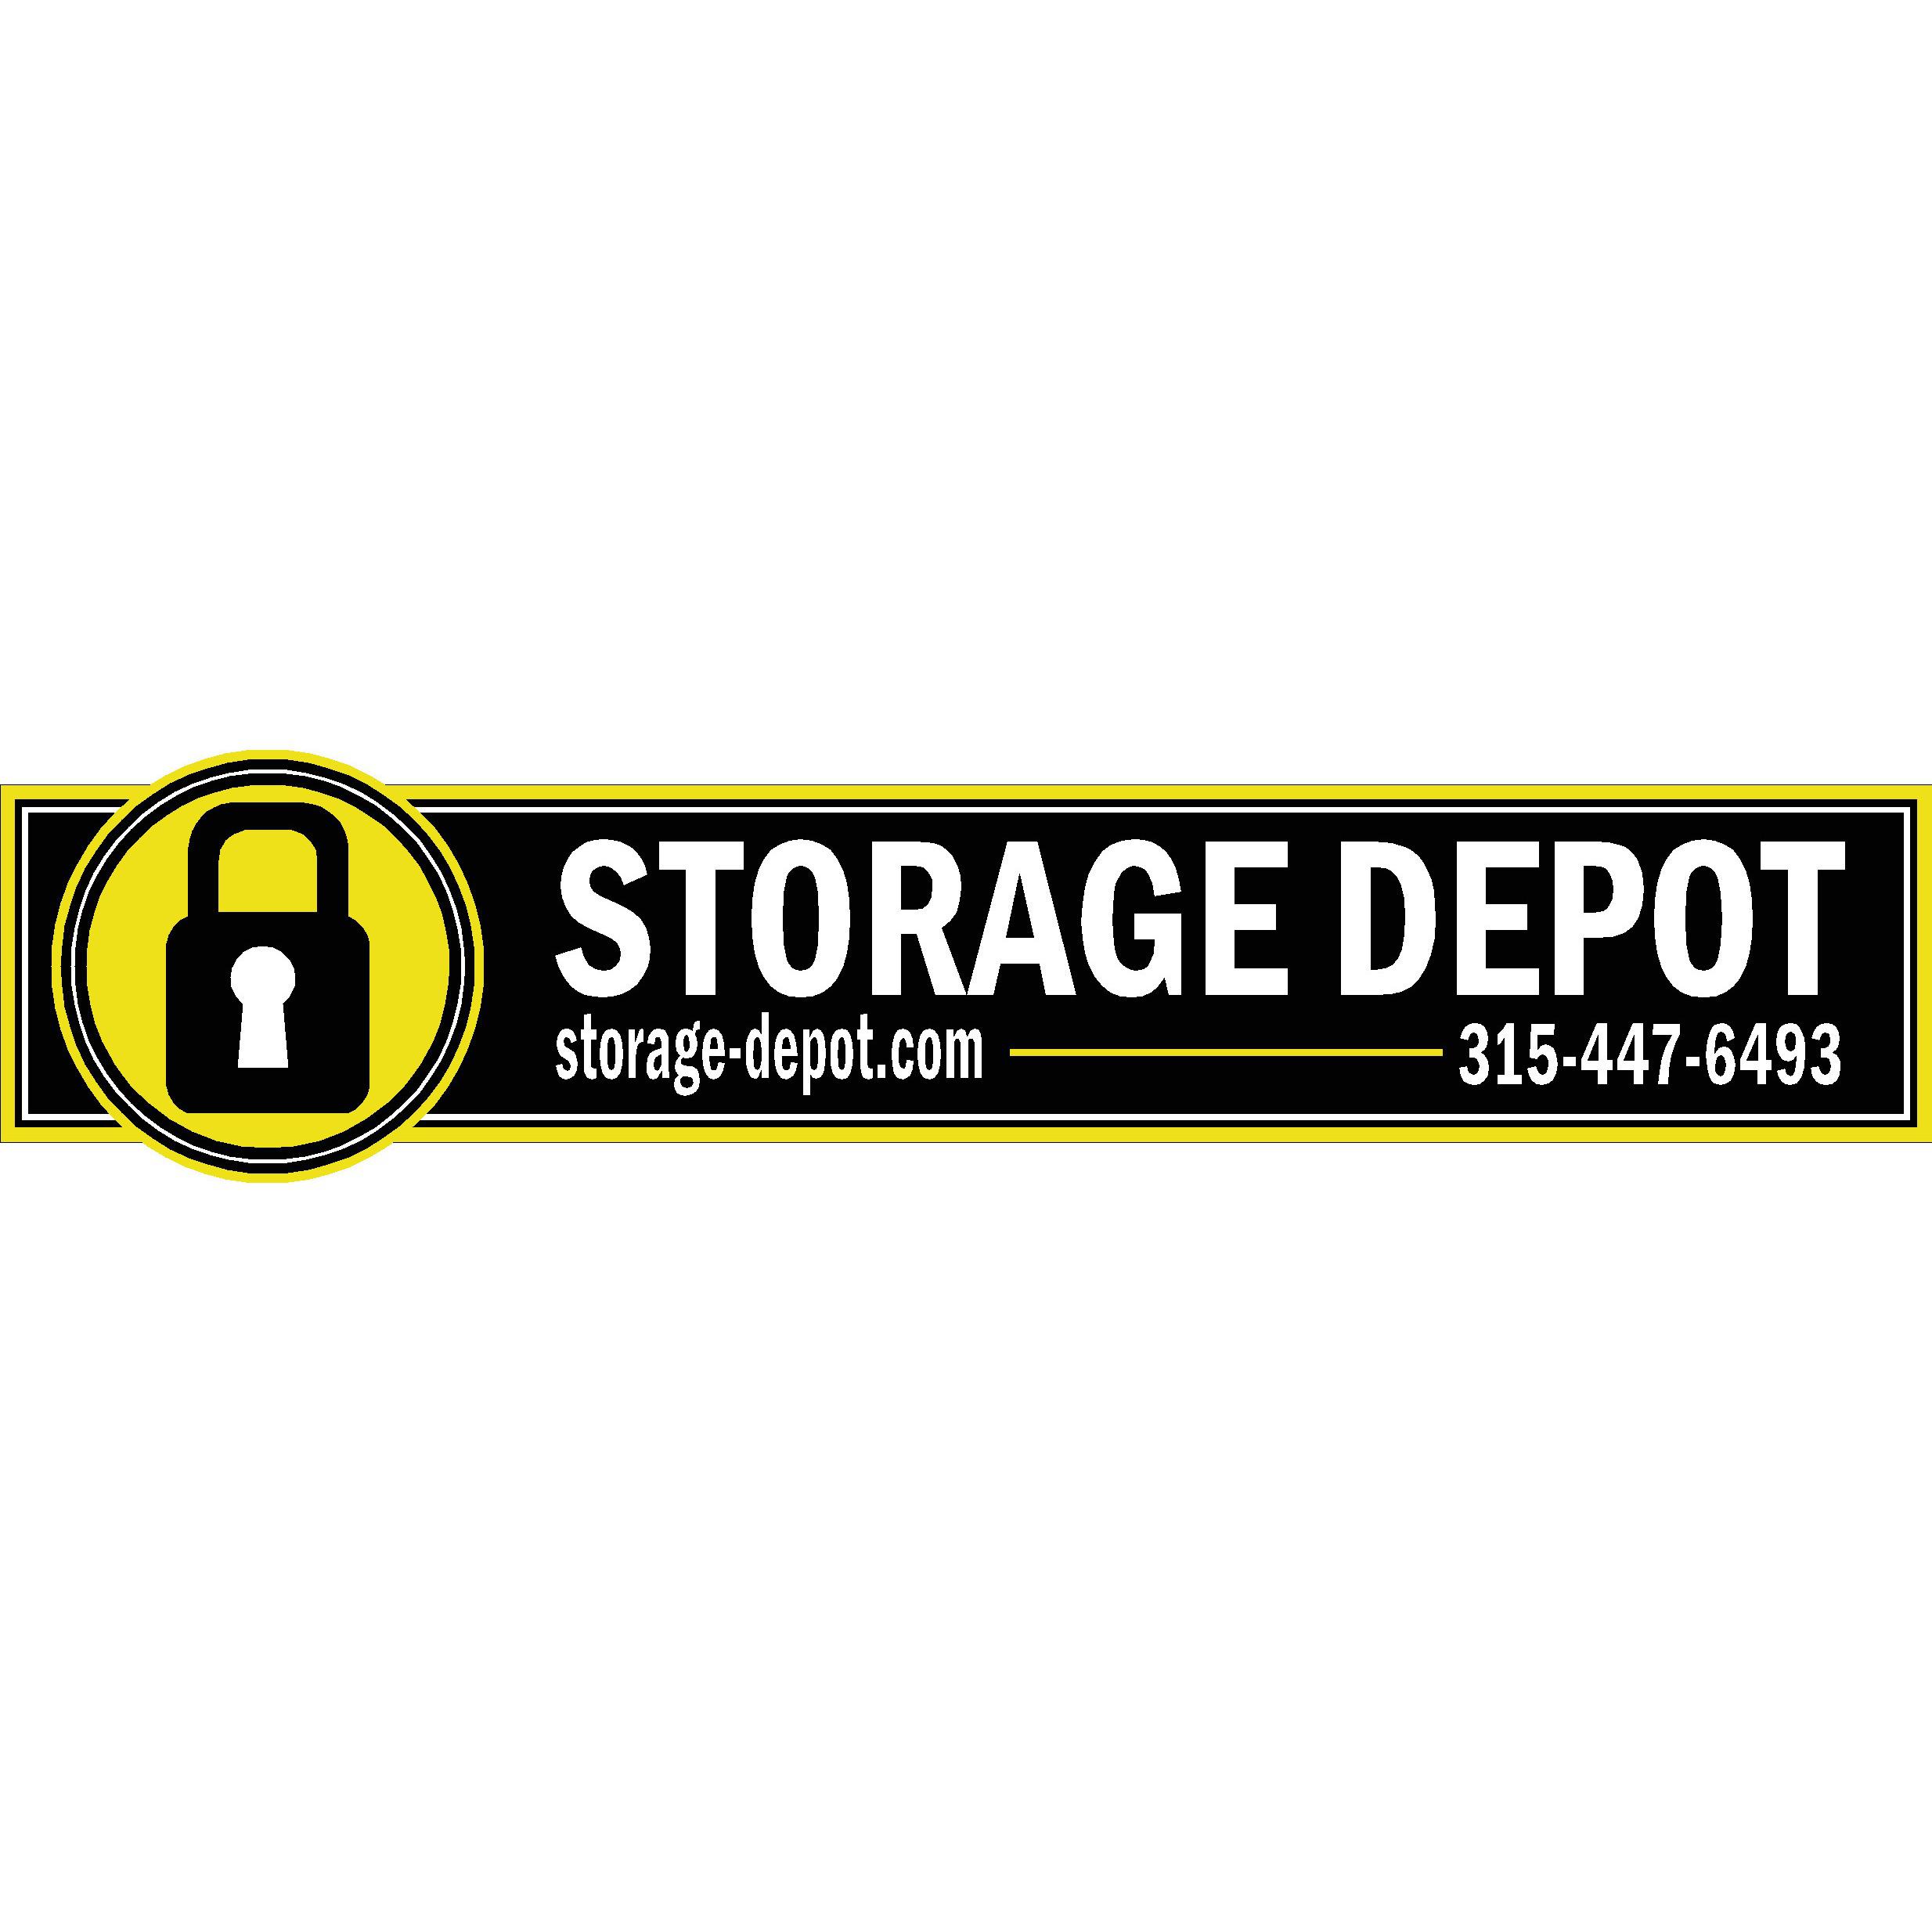 Watertown Storage Depot - Watertown, NY 13601 - (315)447-6493 | ShowMeLocal.com